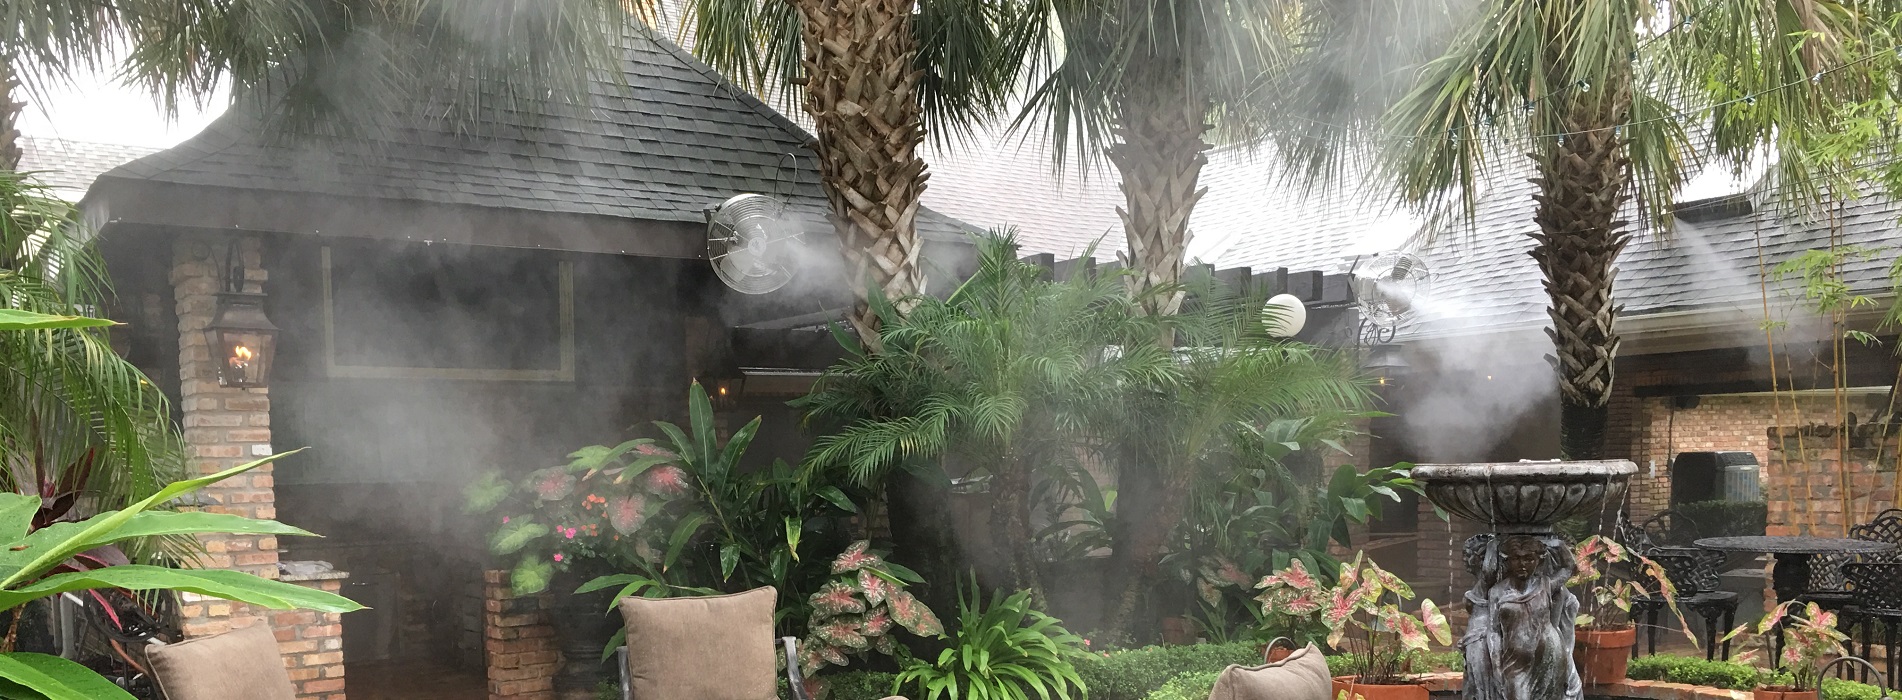 outdoor courtyard patio high pressure misting system stainless fans new Orleans residential